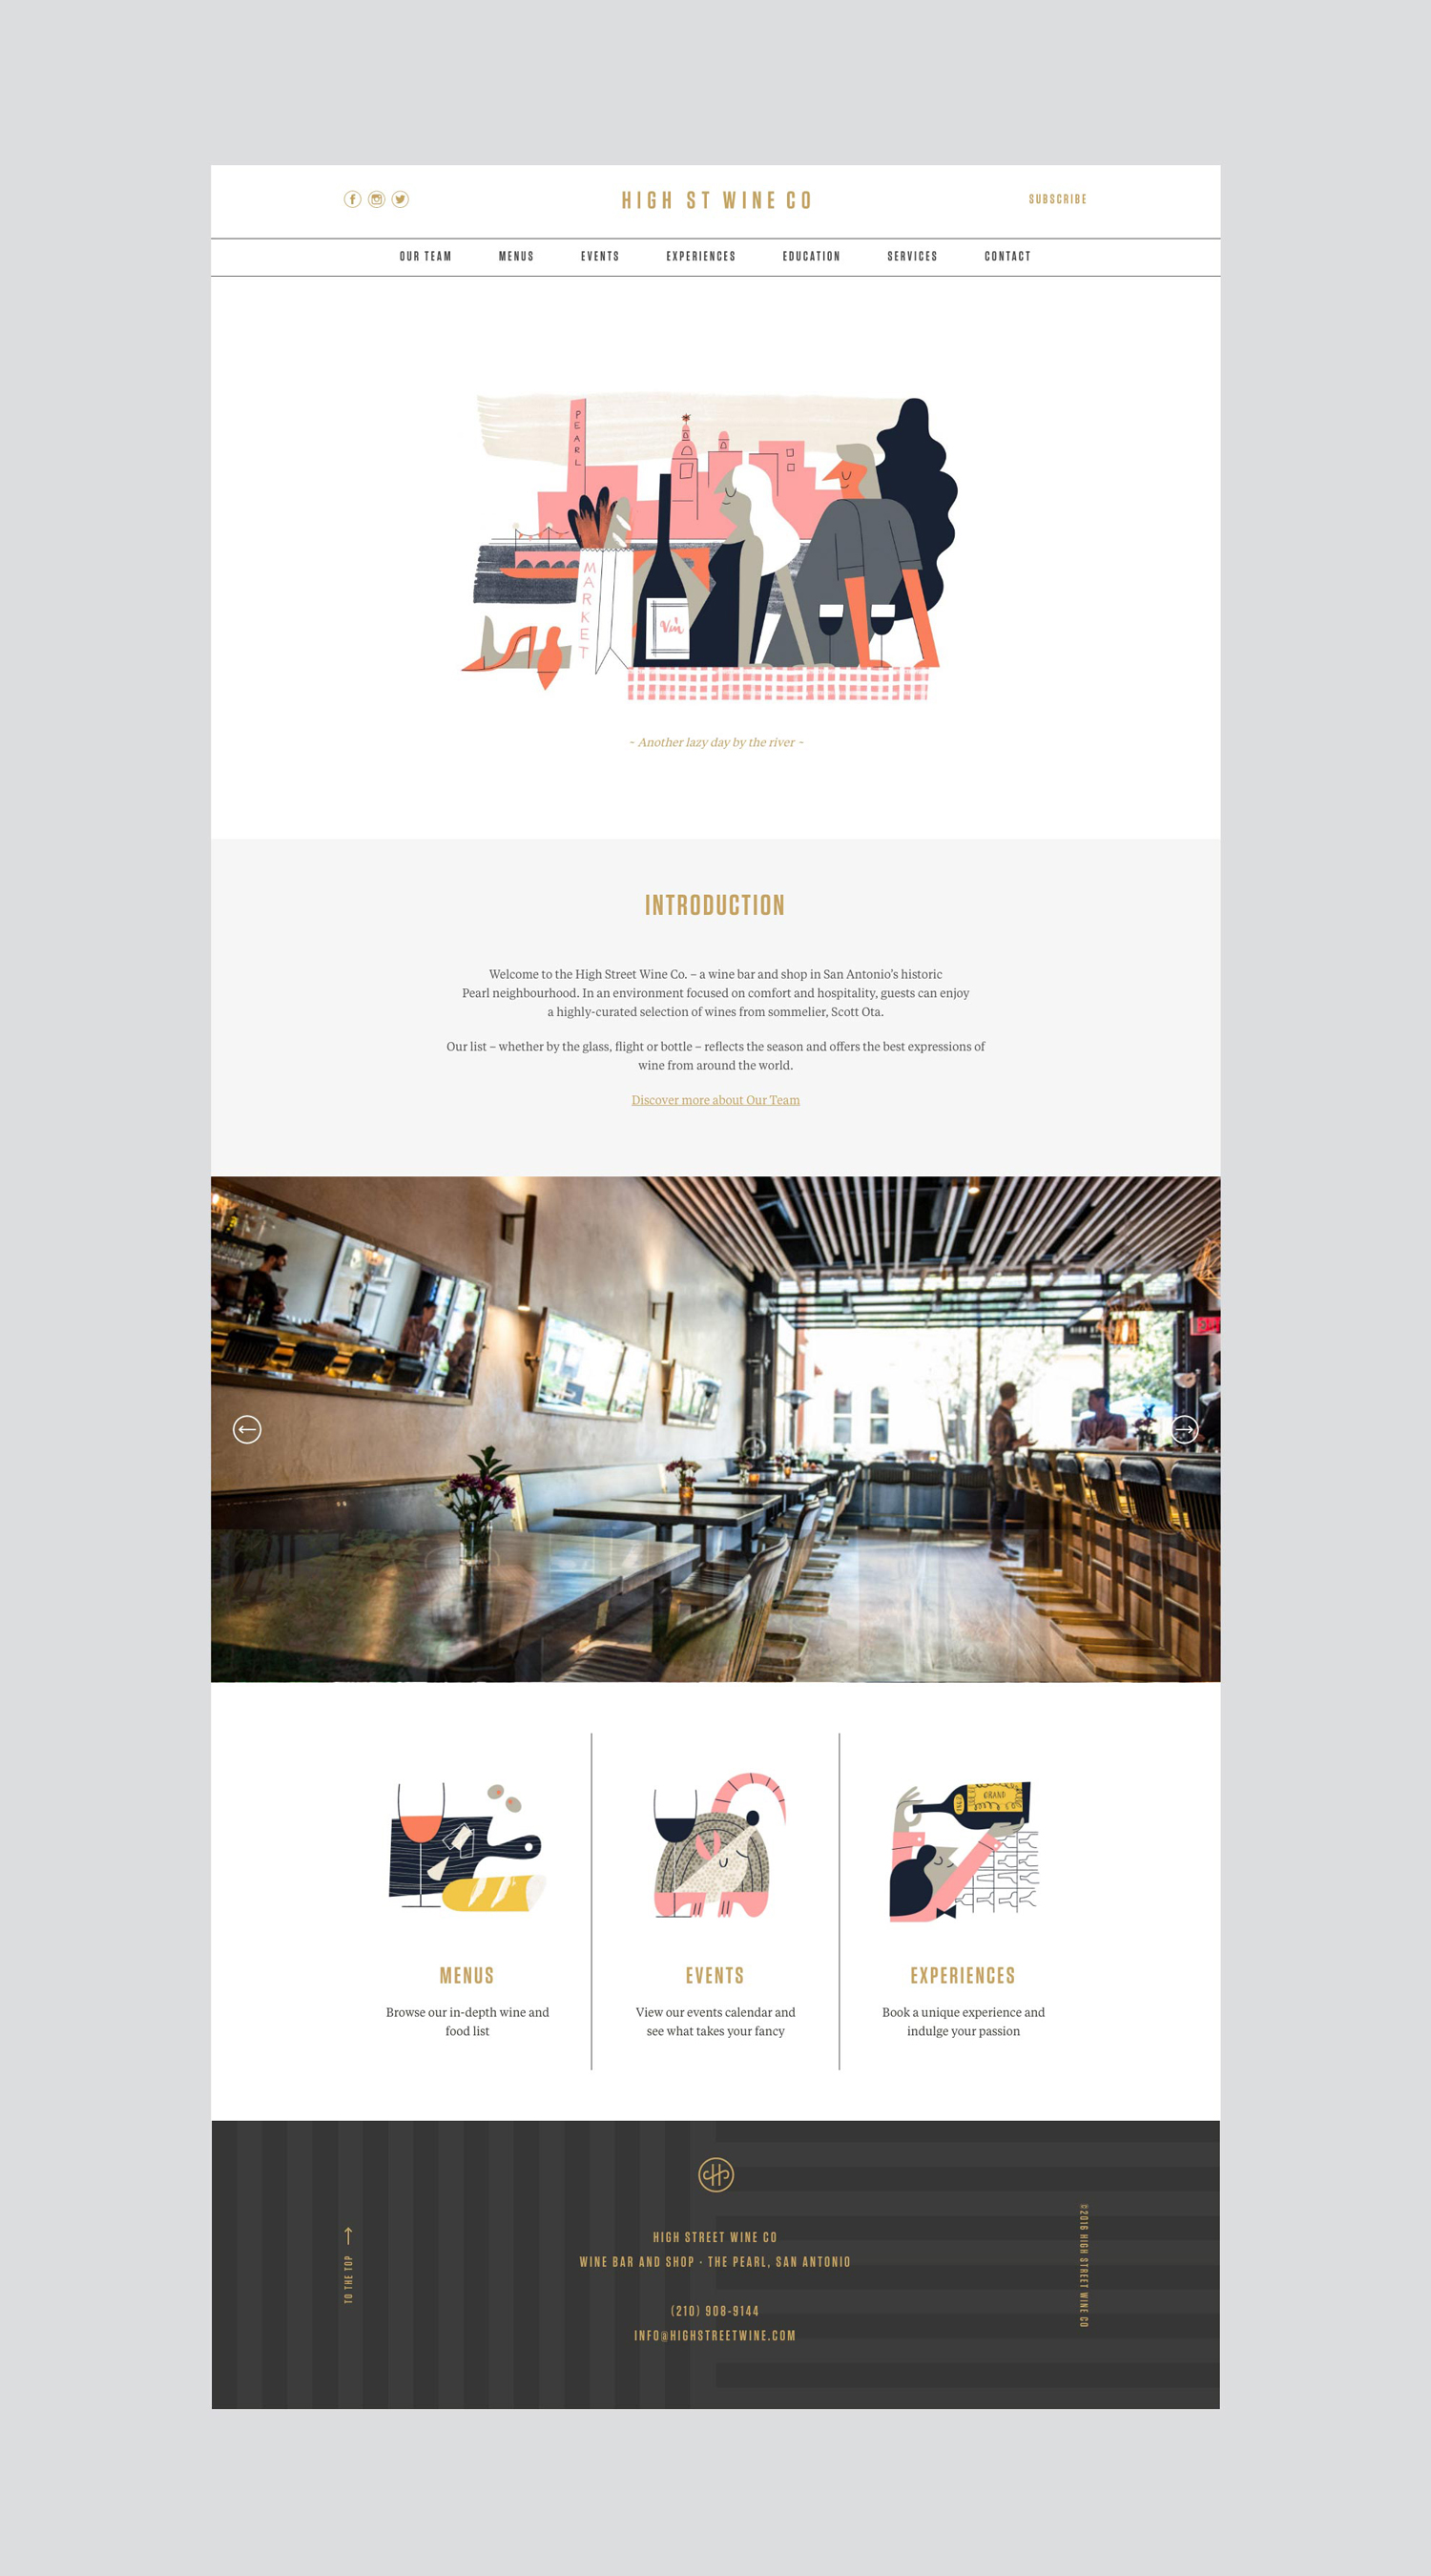 Brand identity and website by Conductor for High Street Wine Co, a wine bar and shop located in San Antonio's Pearl neighbourhood